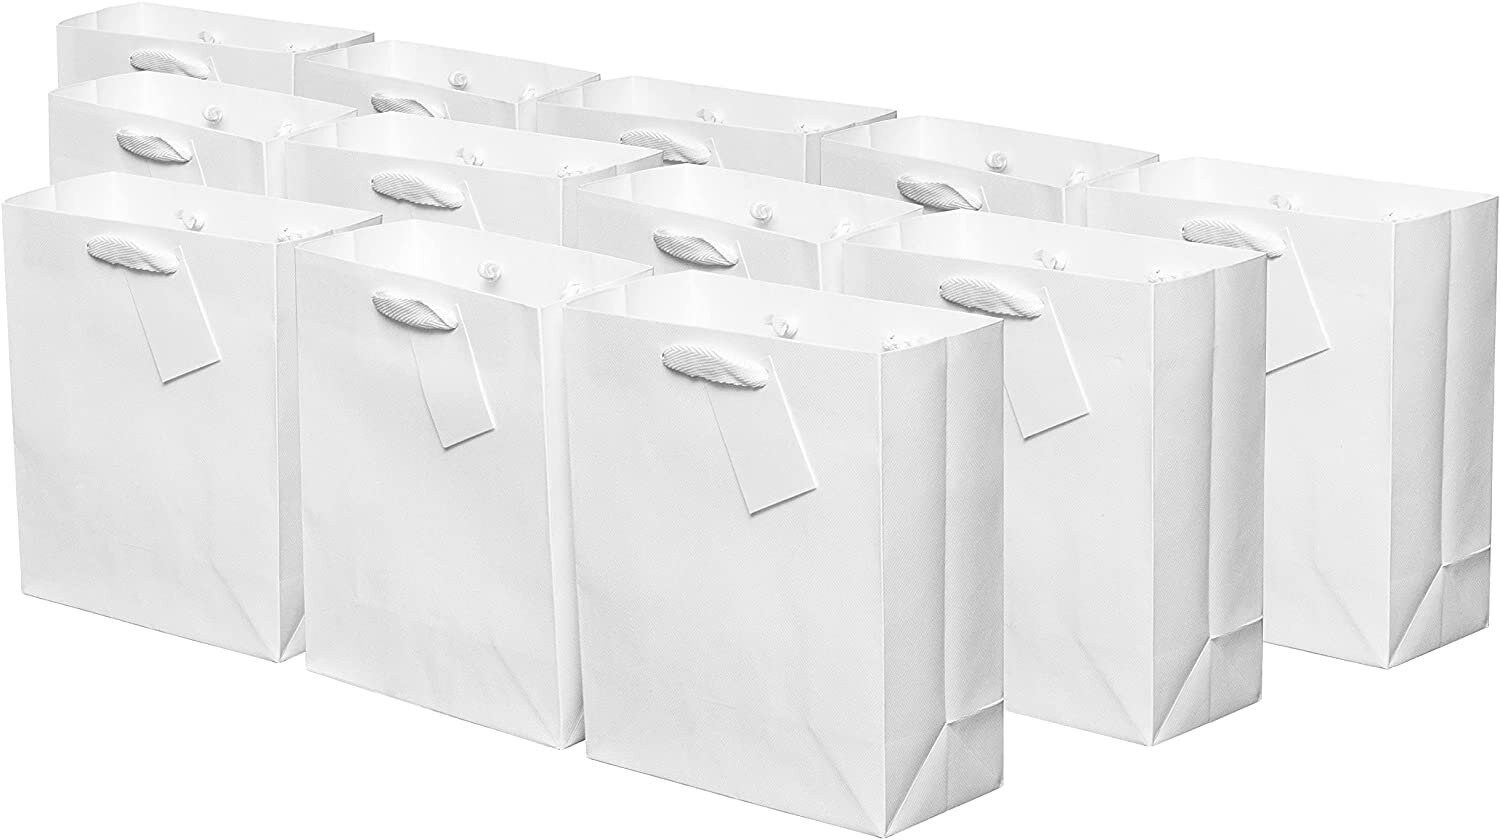 Prime Line Packaging Large Gift Bags with Handles, Brown Cotton Twill Handle Shopping Bags Bulk 16x6x12 50 Pack